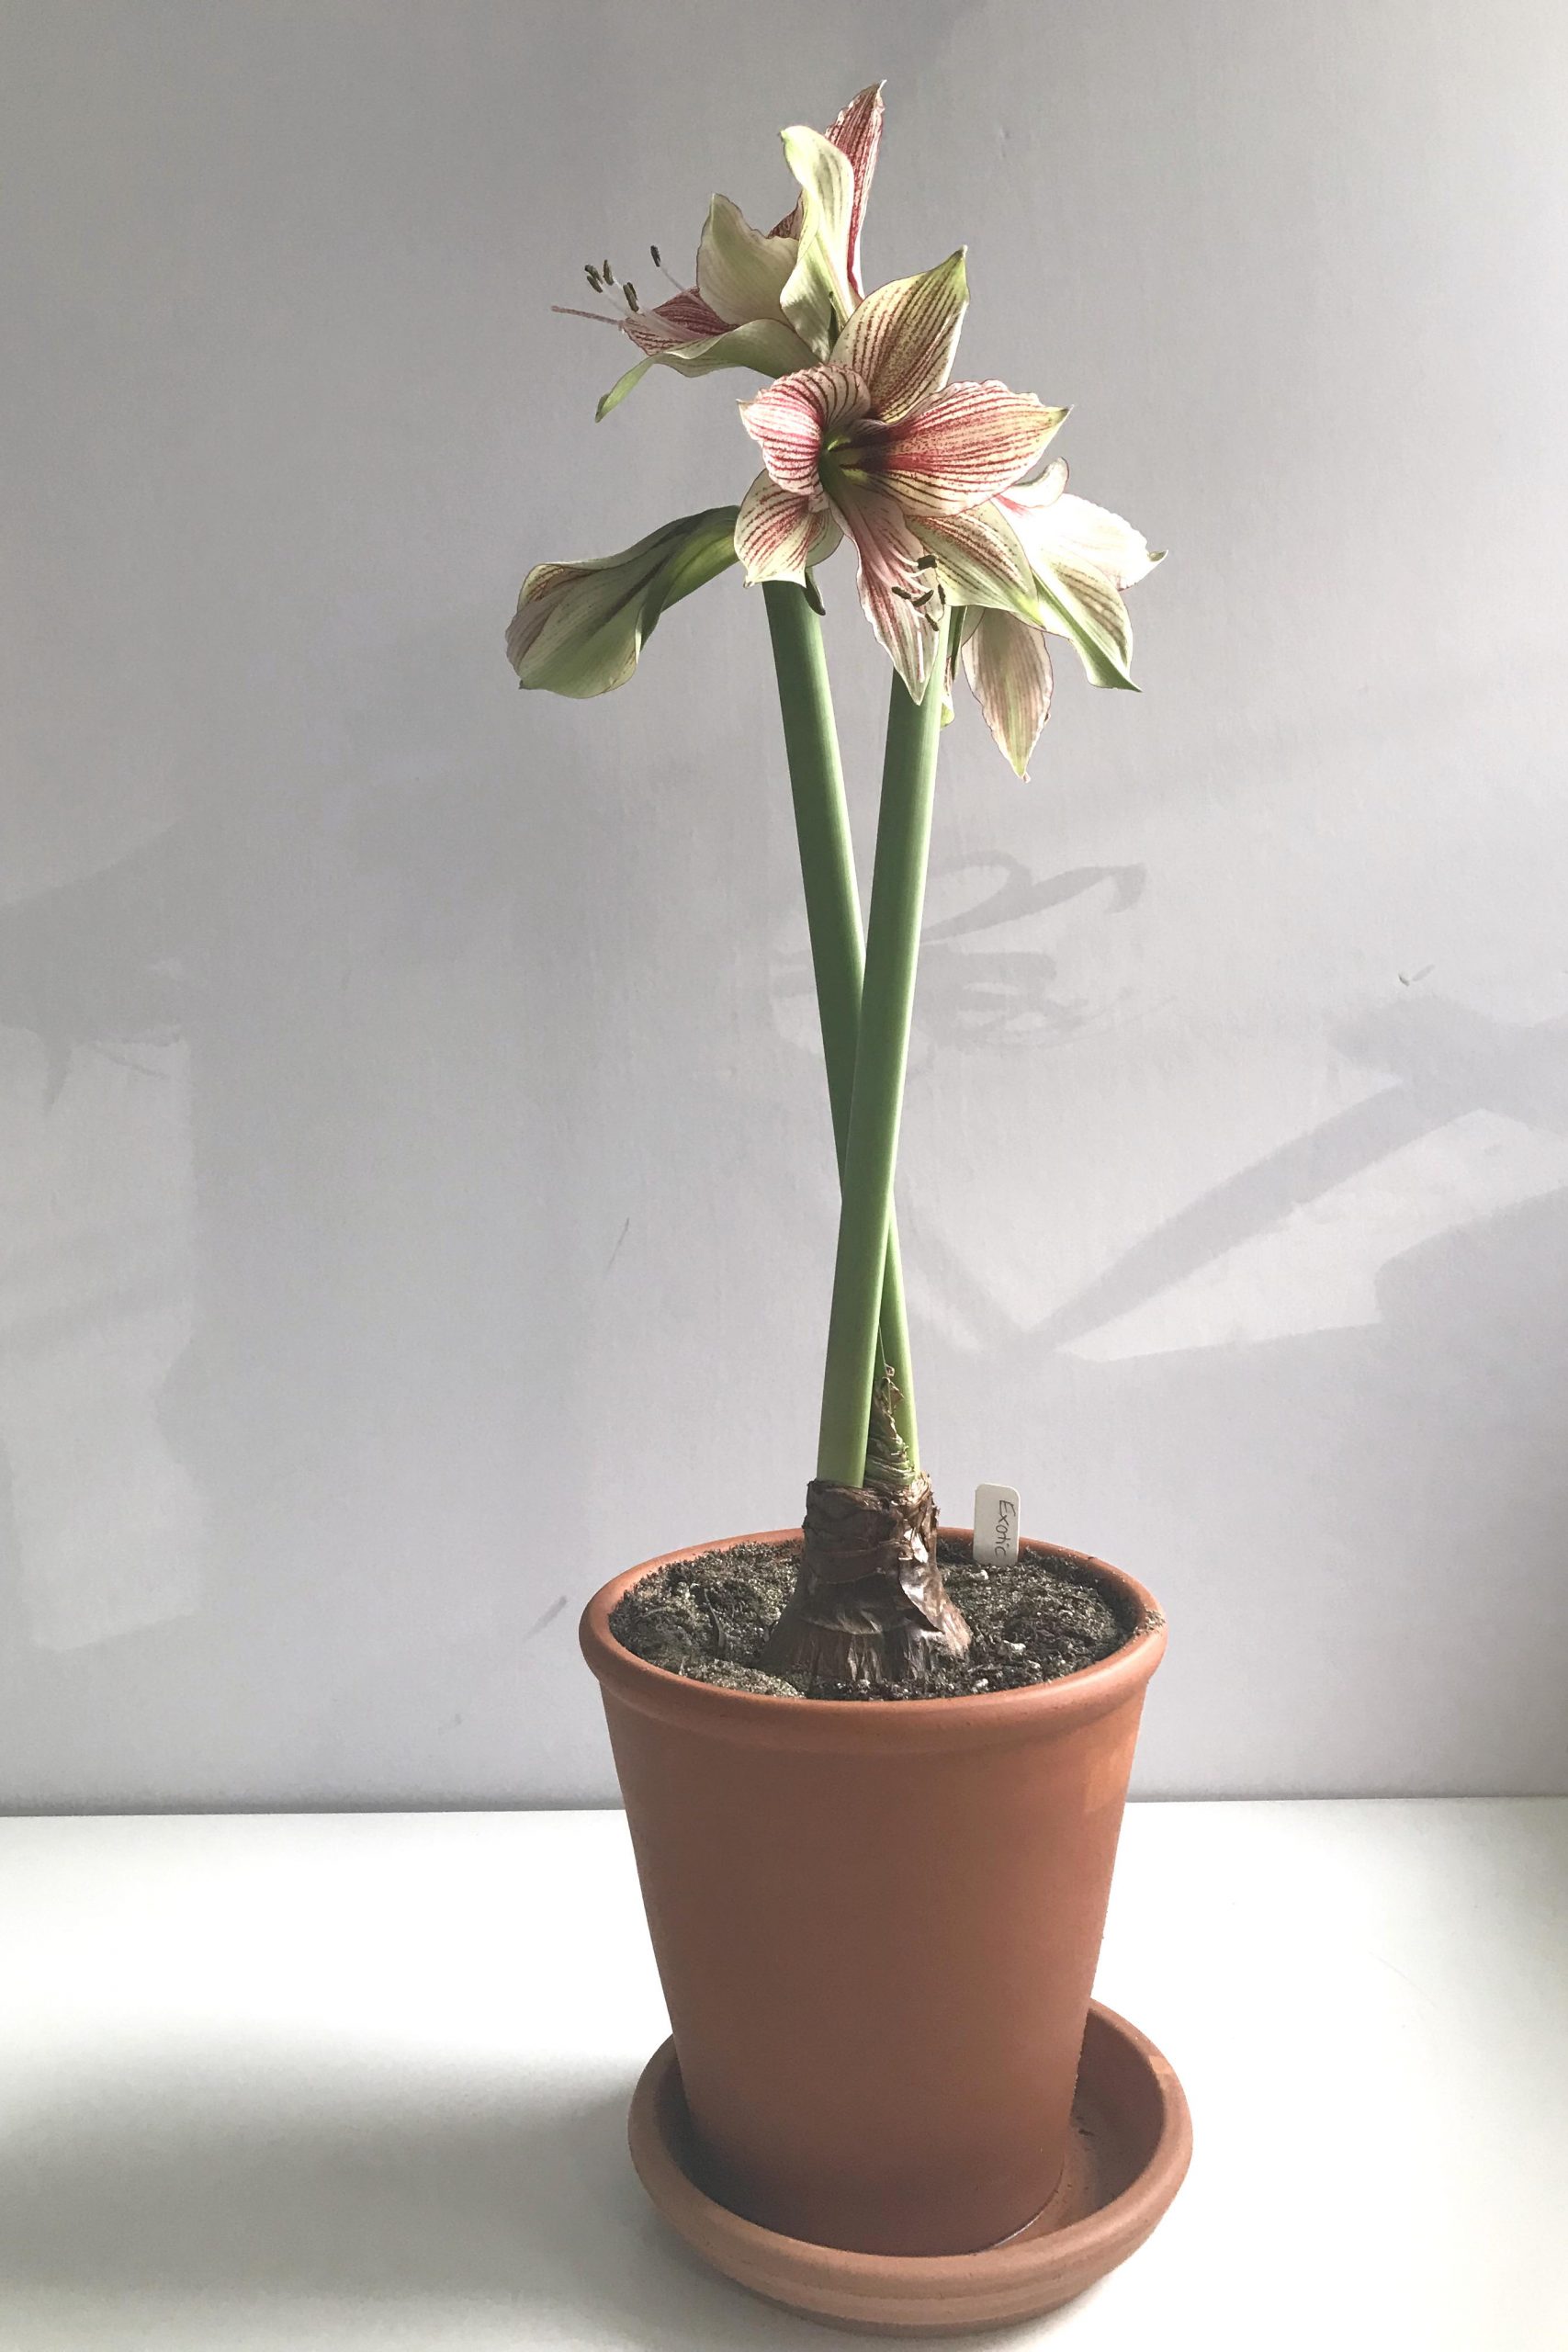 Three open flowers and a bud on green and red-striped amaryllis 'Exotic Star' (hippeastrum), blooming in a terracotta pot on a white desk in Wraptillion's studio.